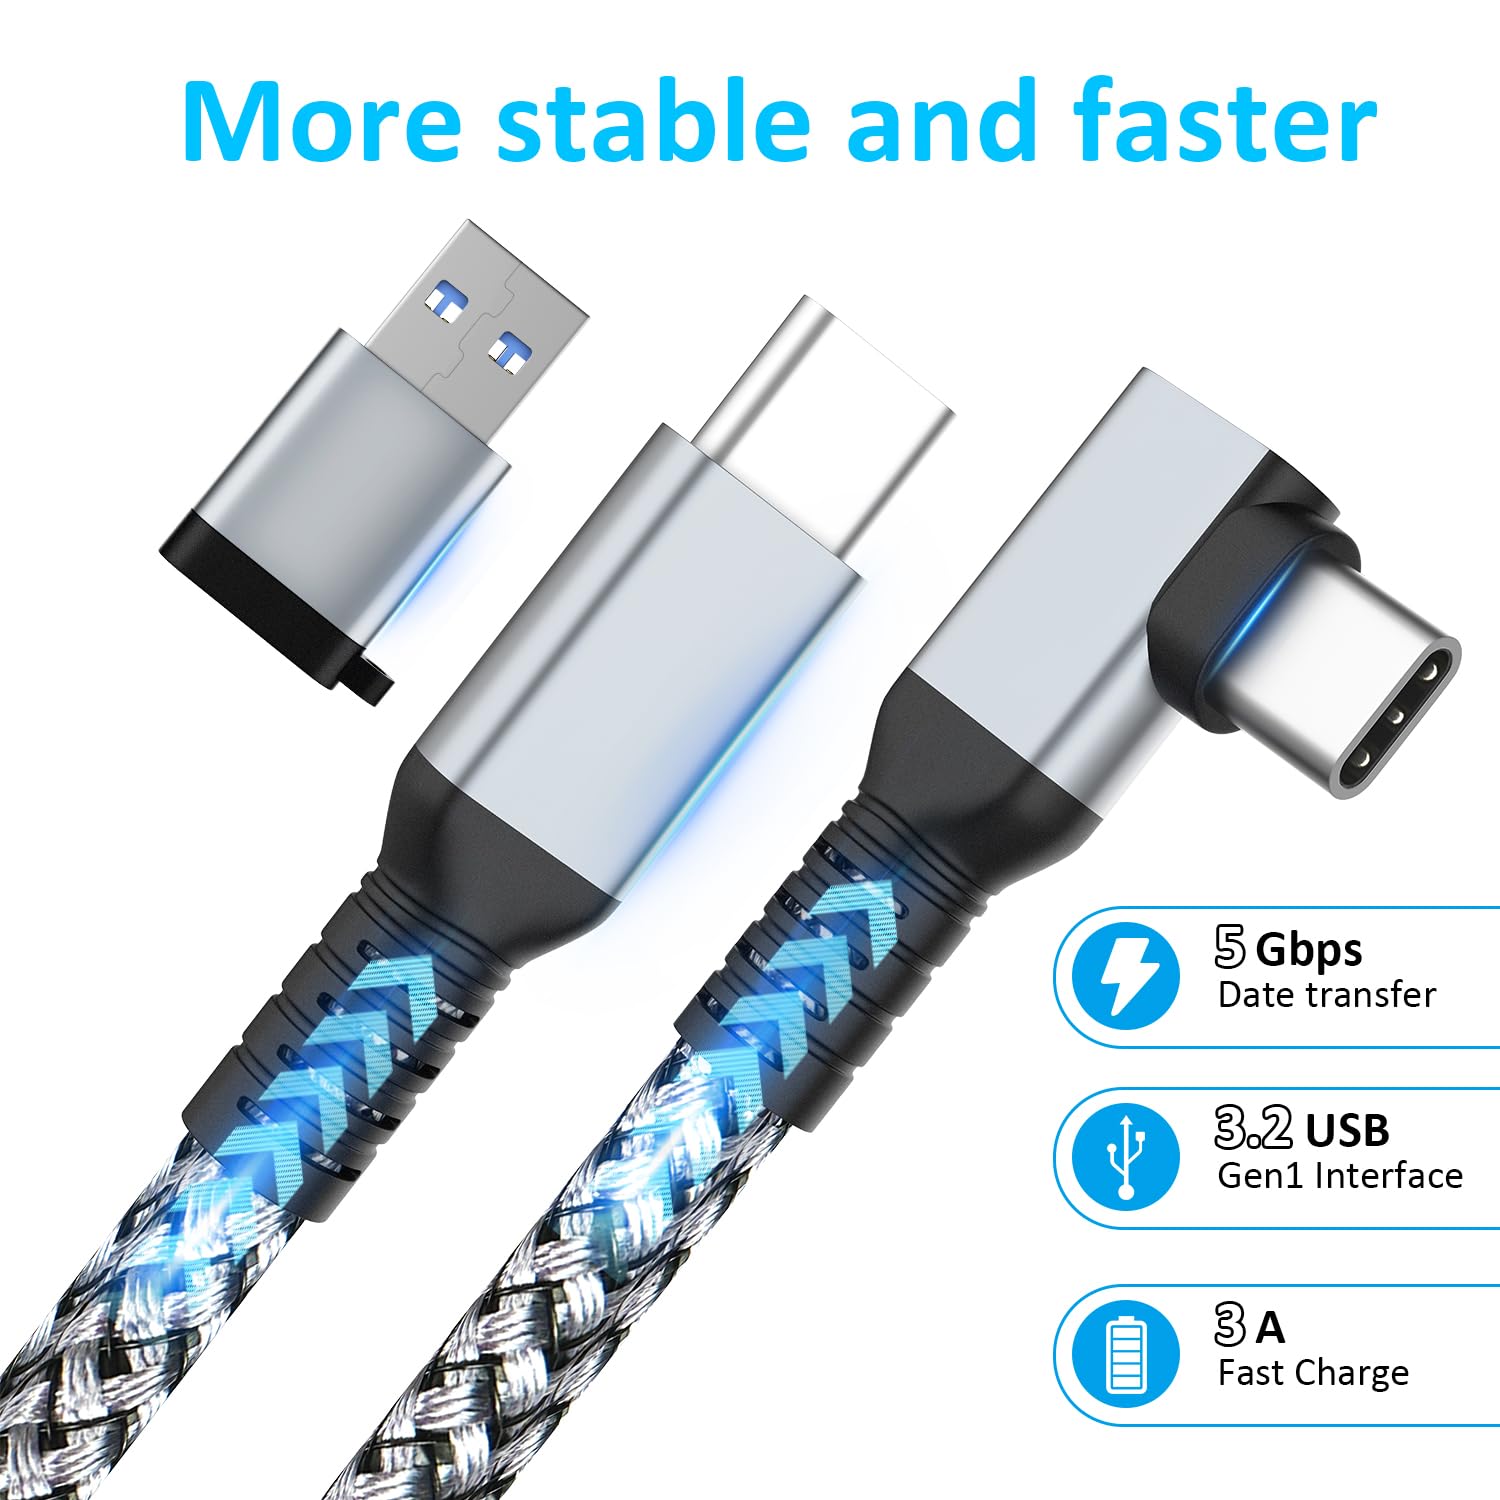 Link Cable 16FT VR Cable Compatible with Meta Oculus Quest 2/Quest 3/Pro Pico, Nylon Braided Accessories and Gaming PC Steam VR, USB 3.0 Data Transfer Type C Cable, for VR Headset